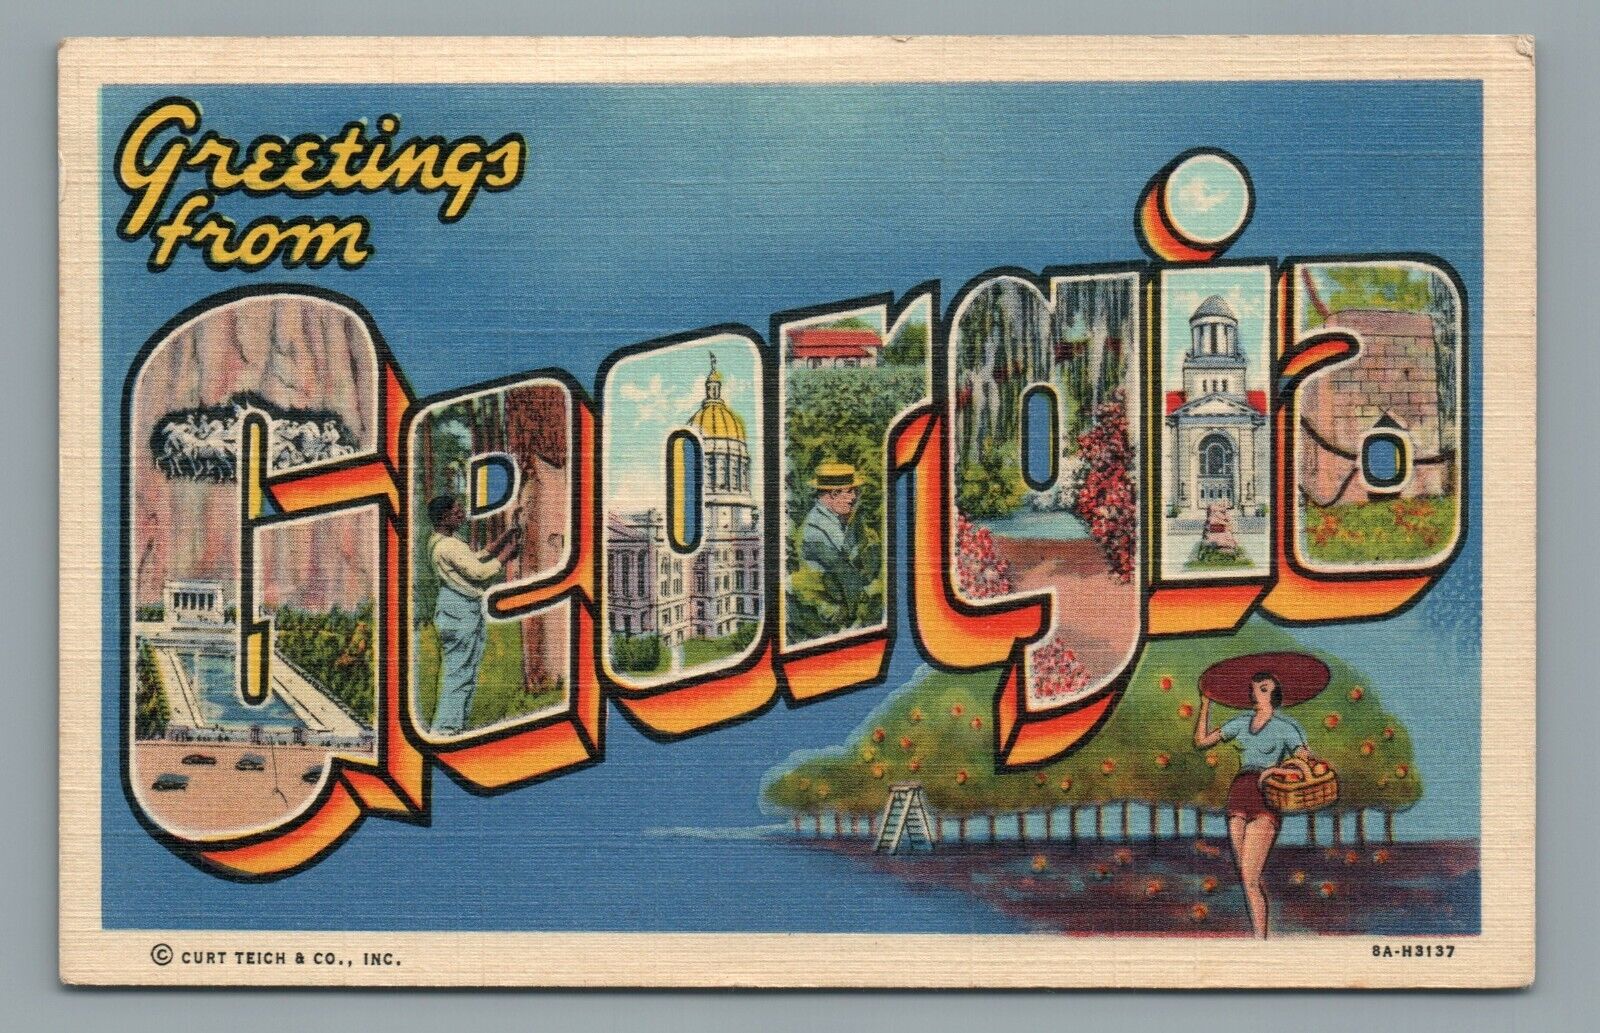 Greetings from Georgia Large Letter Linen Postcard Mfr. Curt Teich Posted 1948